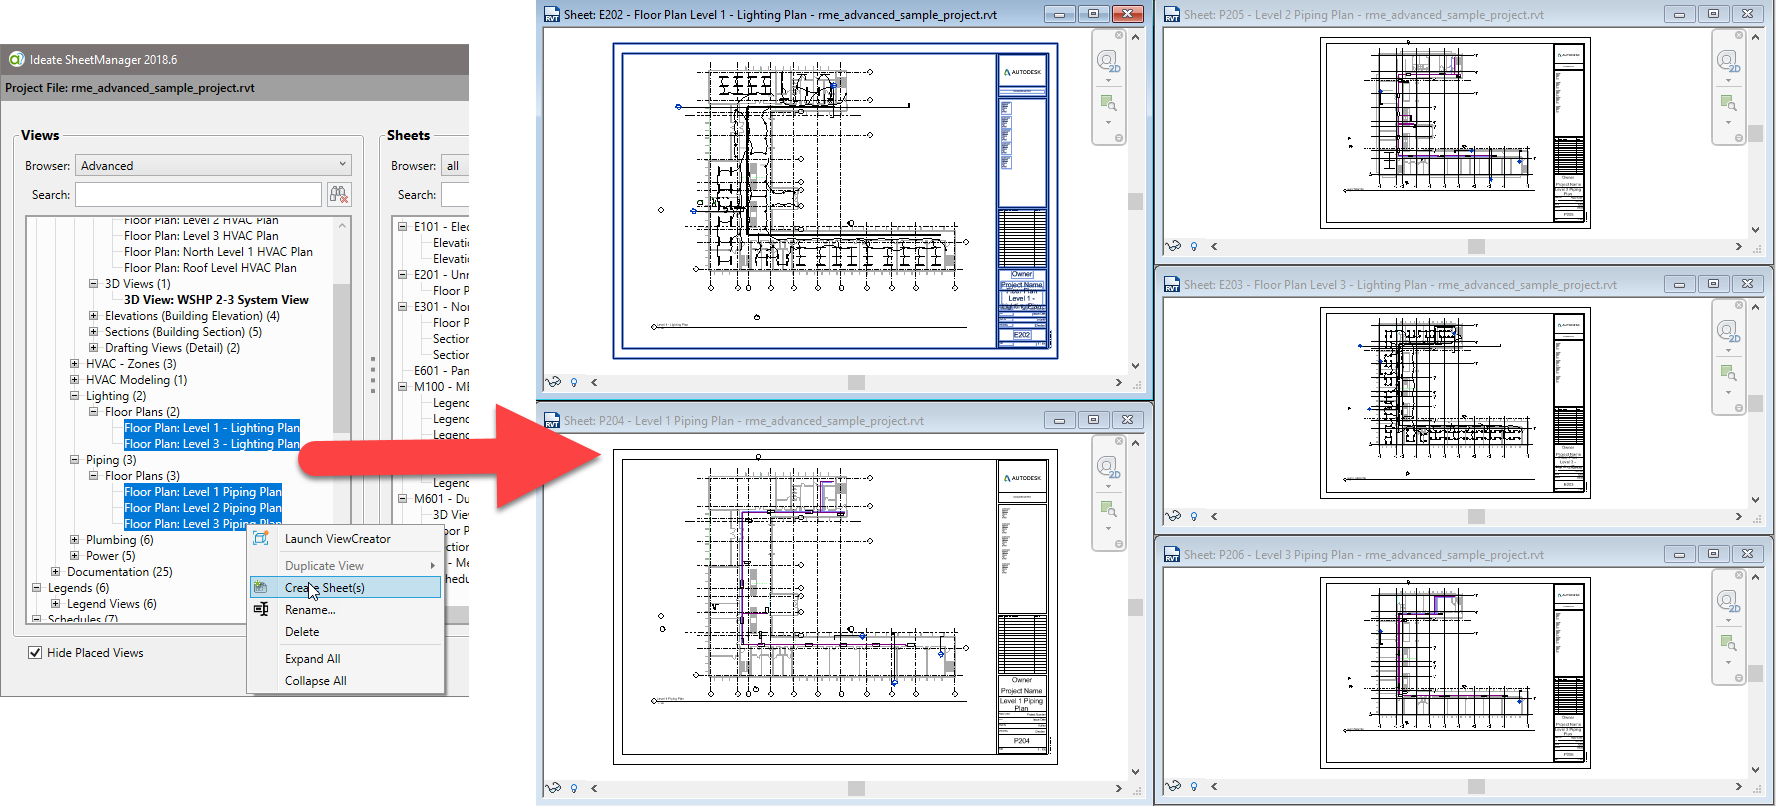 Ideate SheetManager for tedious Revit tasks